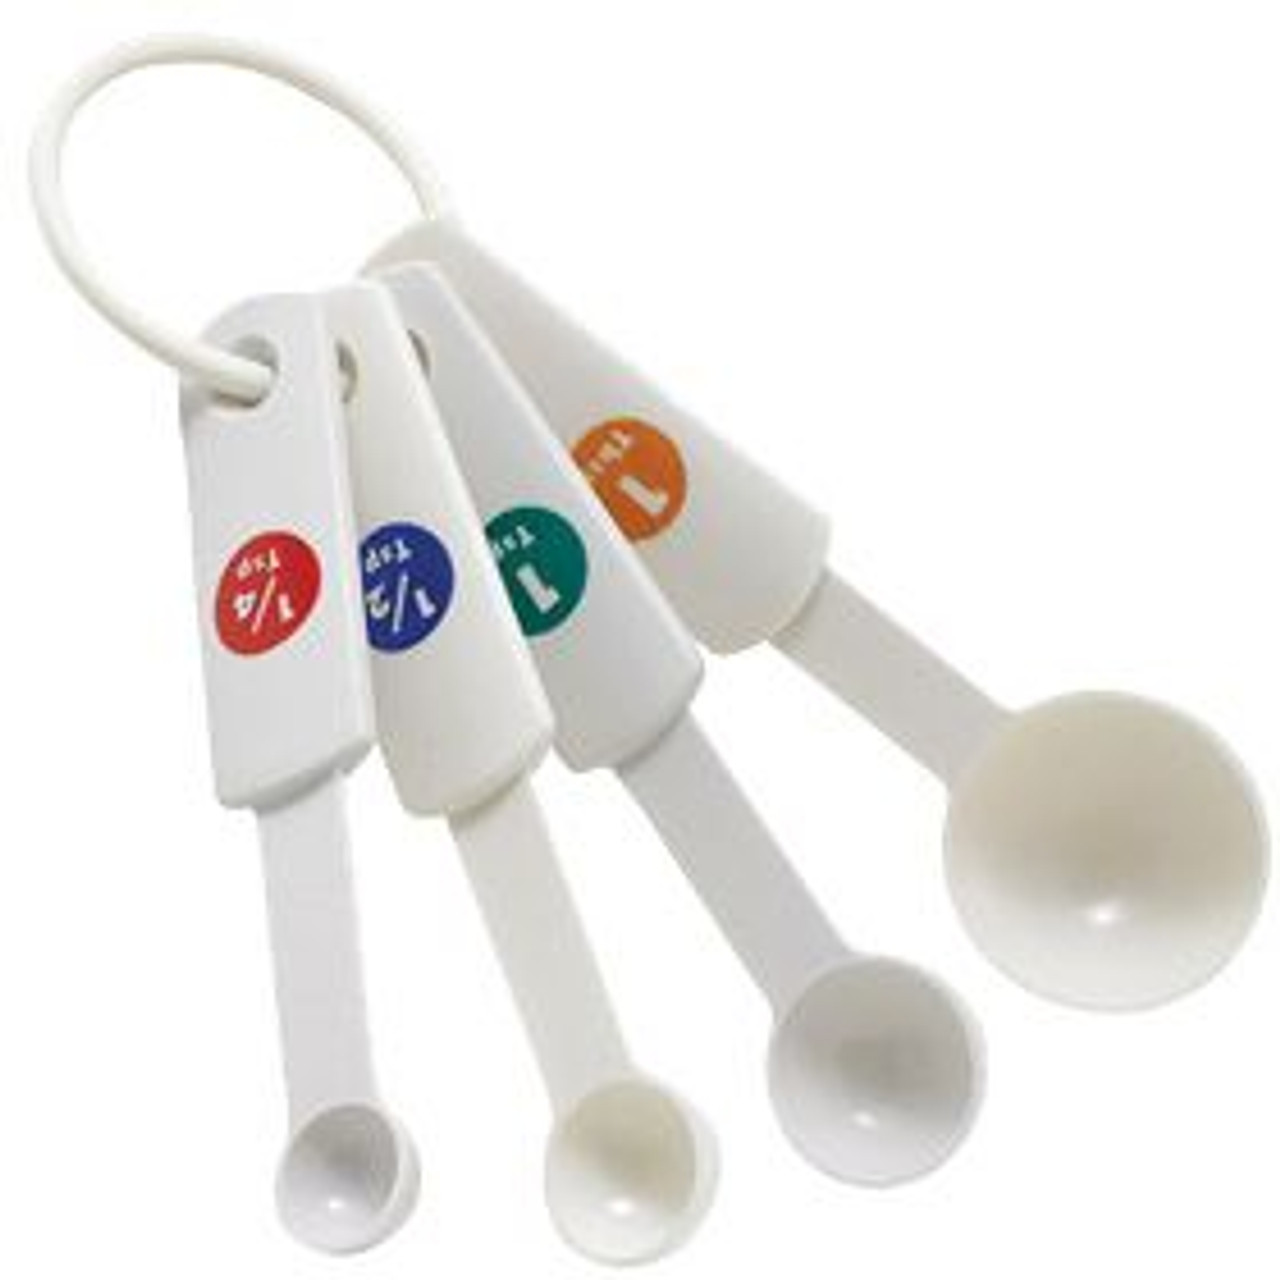 Winco MCPP-4, Set of White Plastic Measuring Cups with Capacity